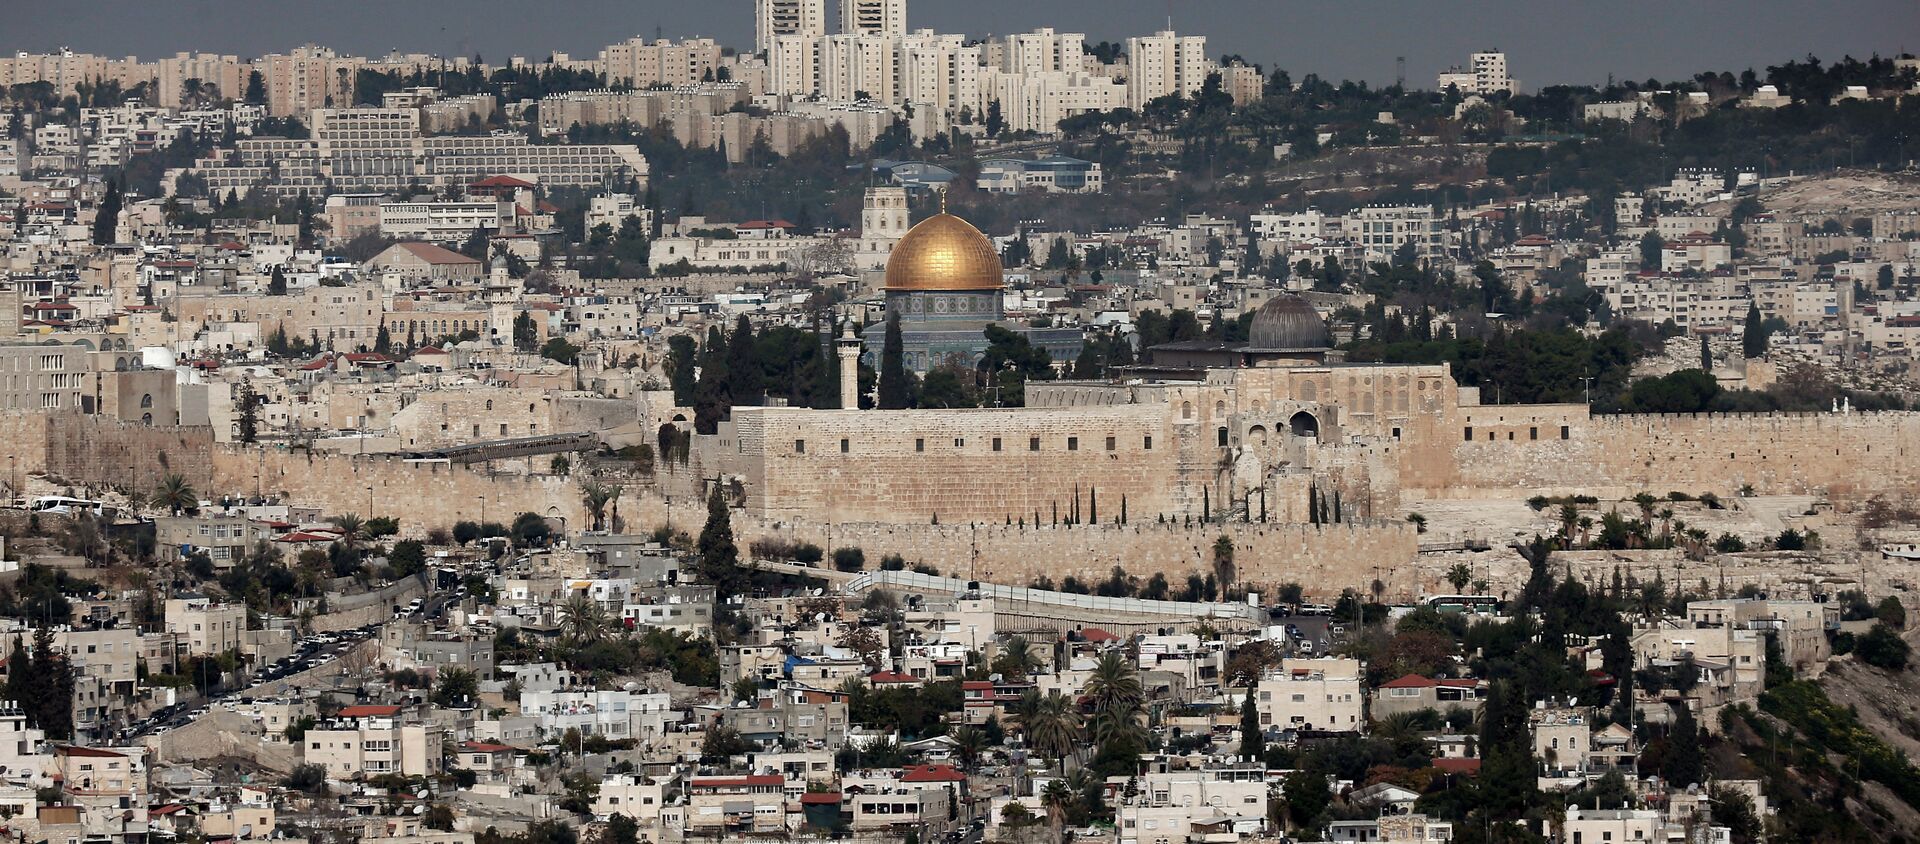 A general view shows the Dome of the Rock (C) and the Al-Aqsa mosques (R) in the Al-Aqsa mosque compound in Jerusalem's old city on November 21, 2014 - Sputnik International, 1920